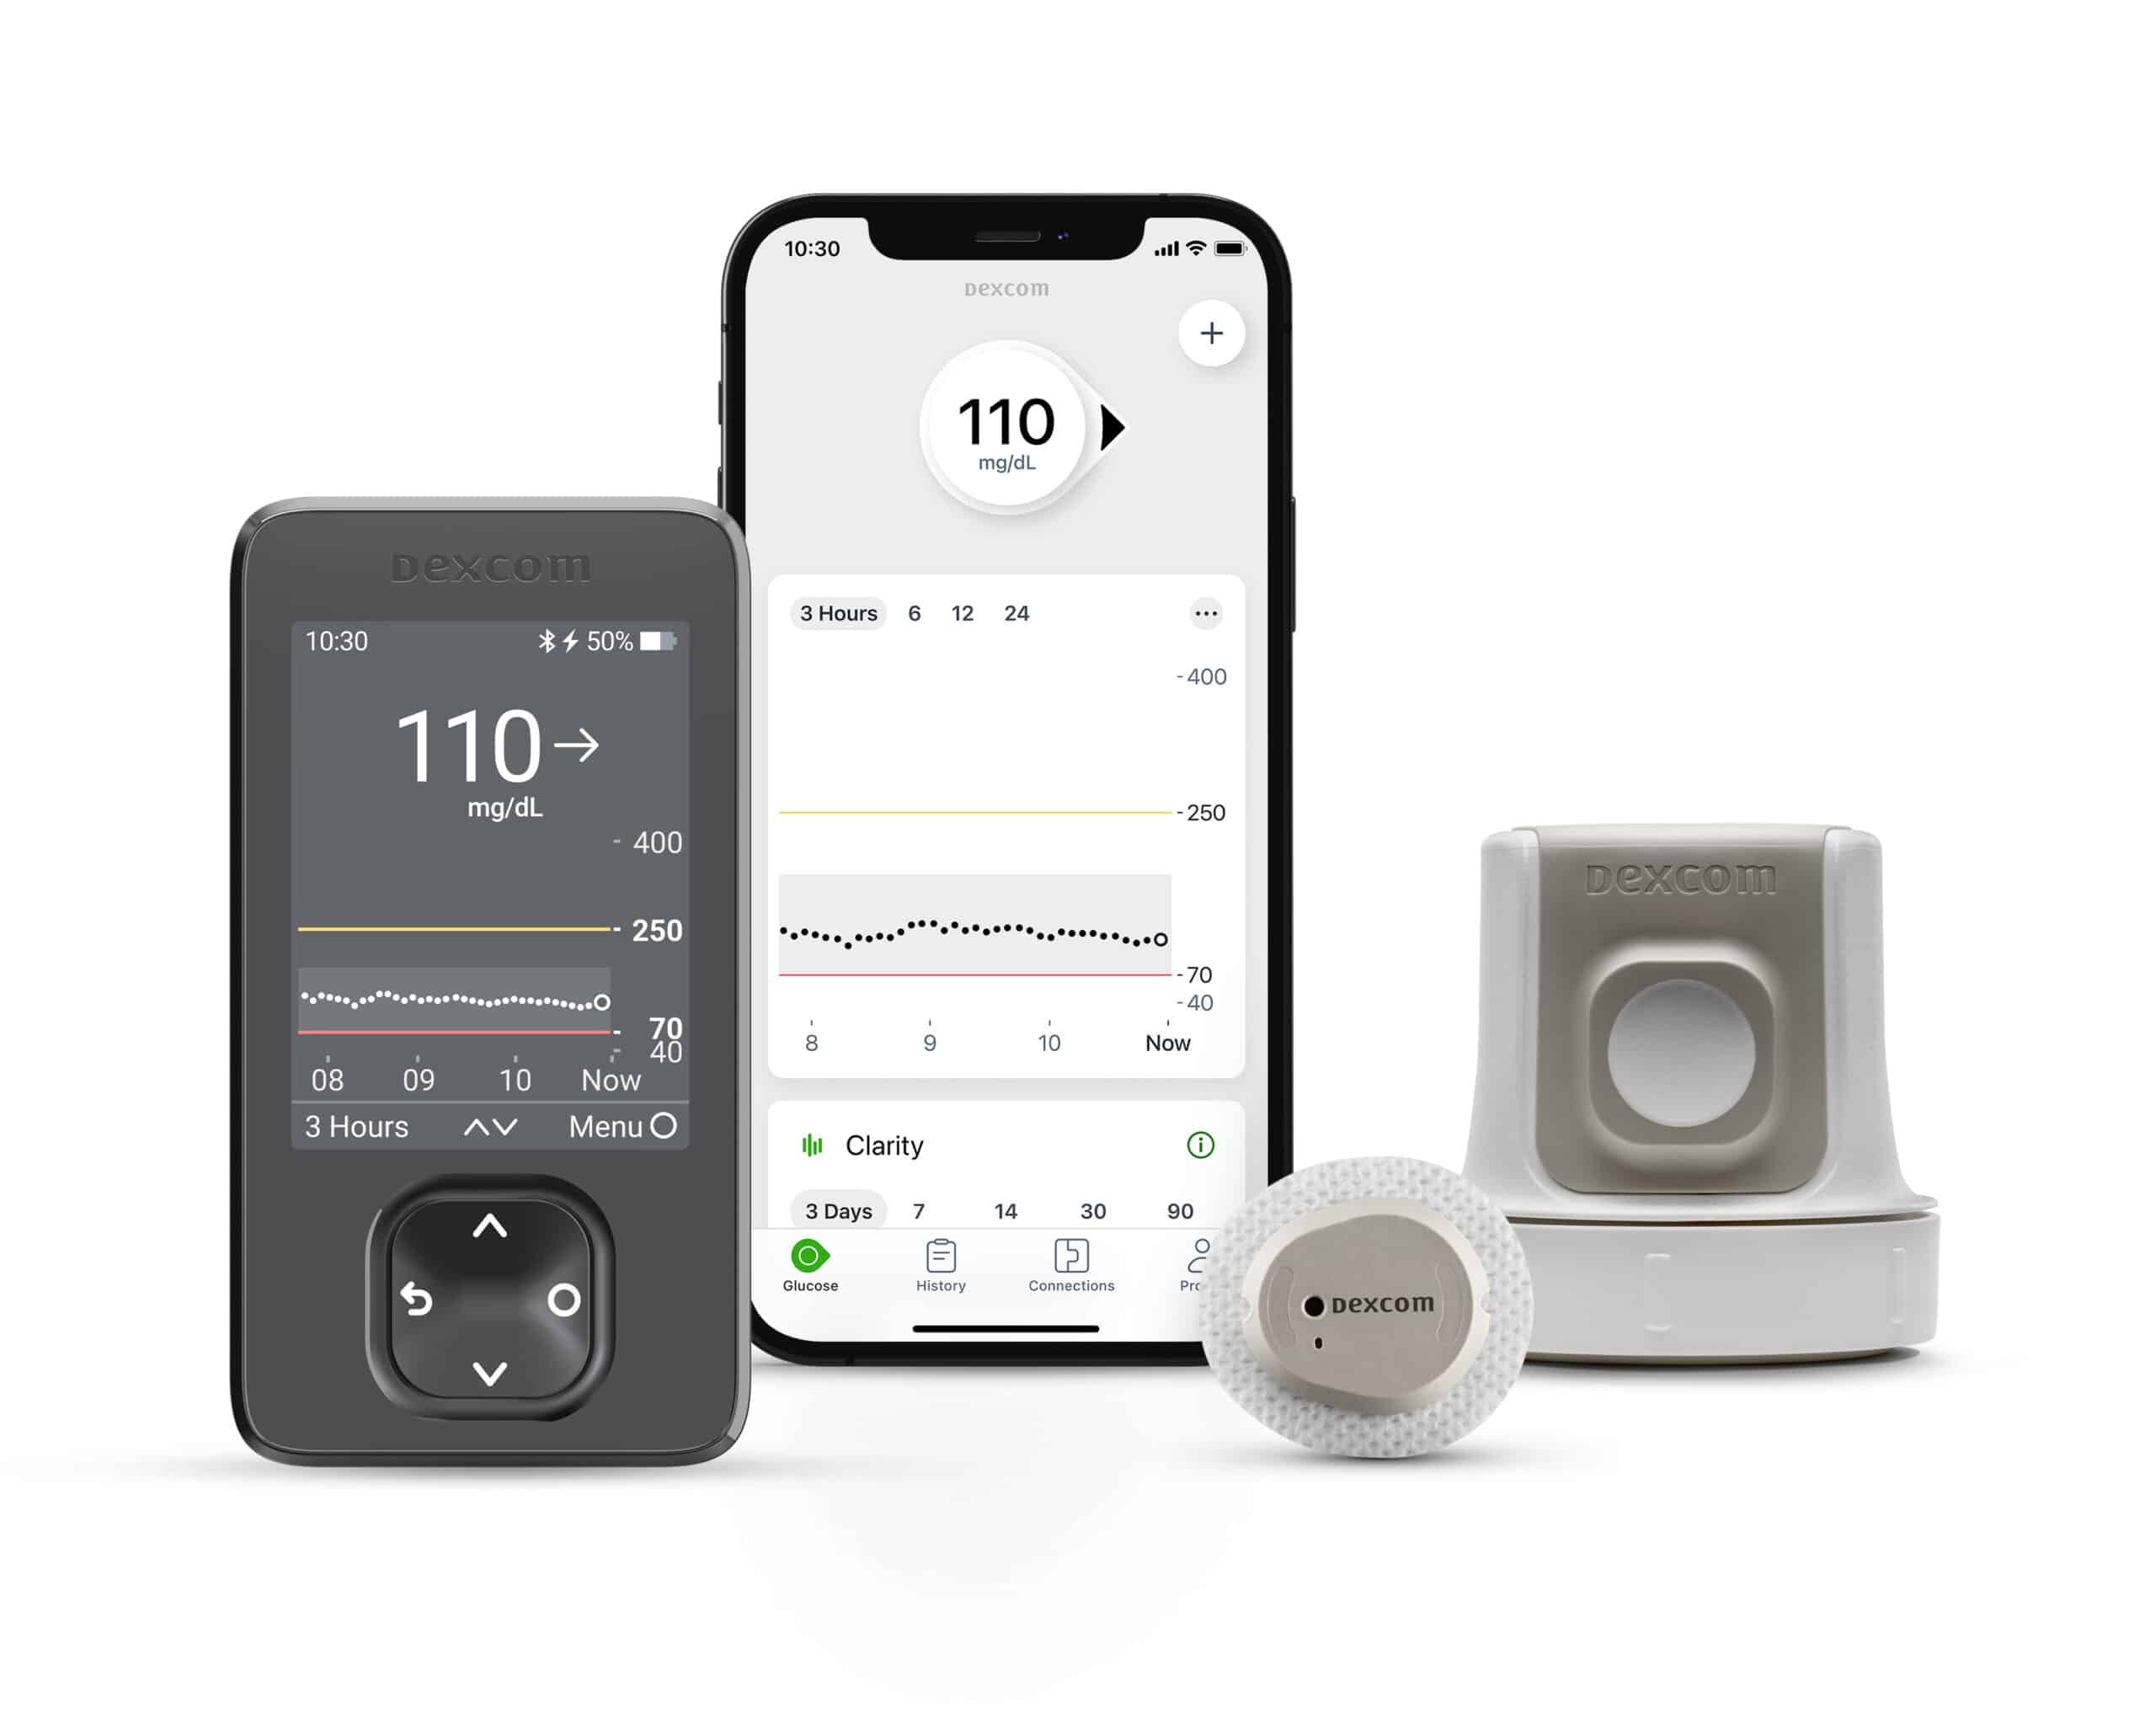 What Does the Dexcom G6 Transmitter Not Found Alert Mean?